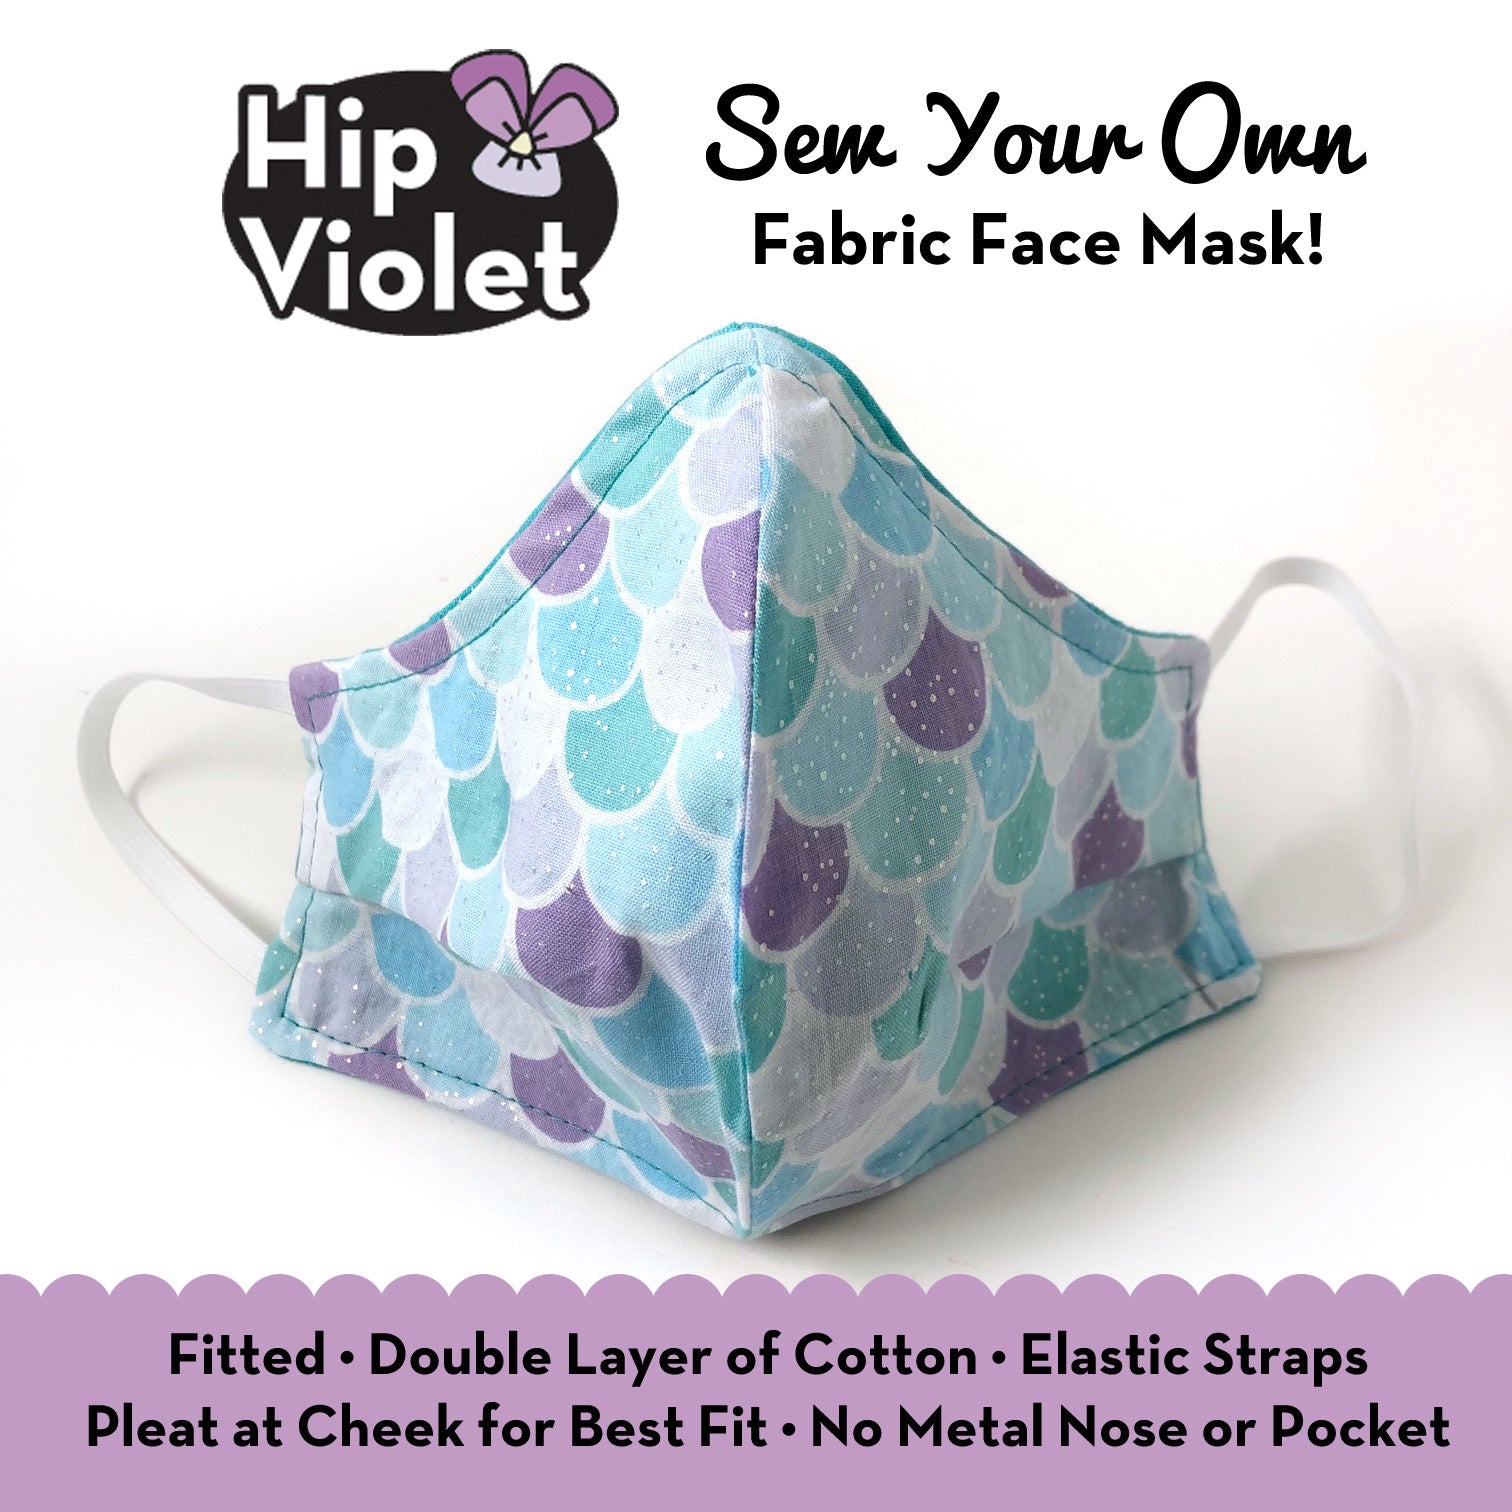 Sew Your Own Fabric Face Mask Pattern Free Hip Violet